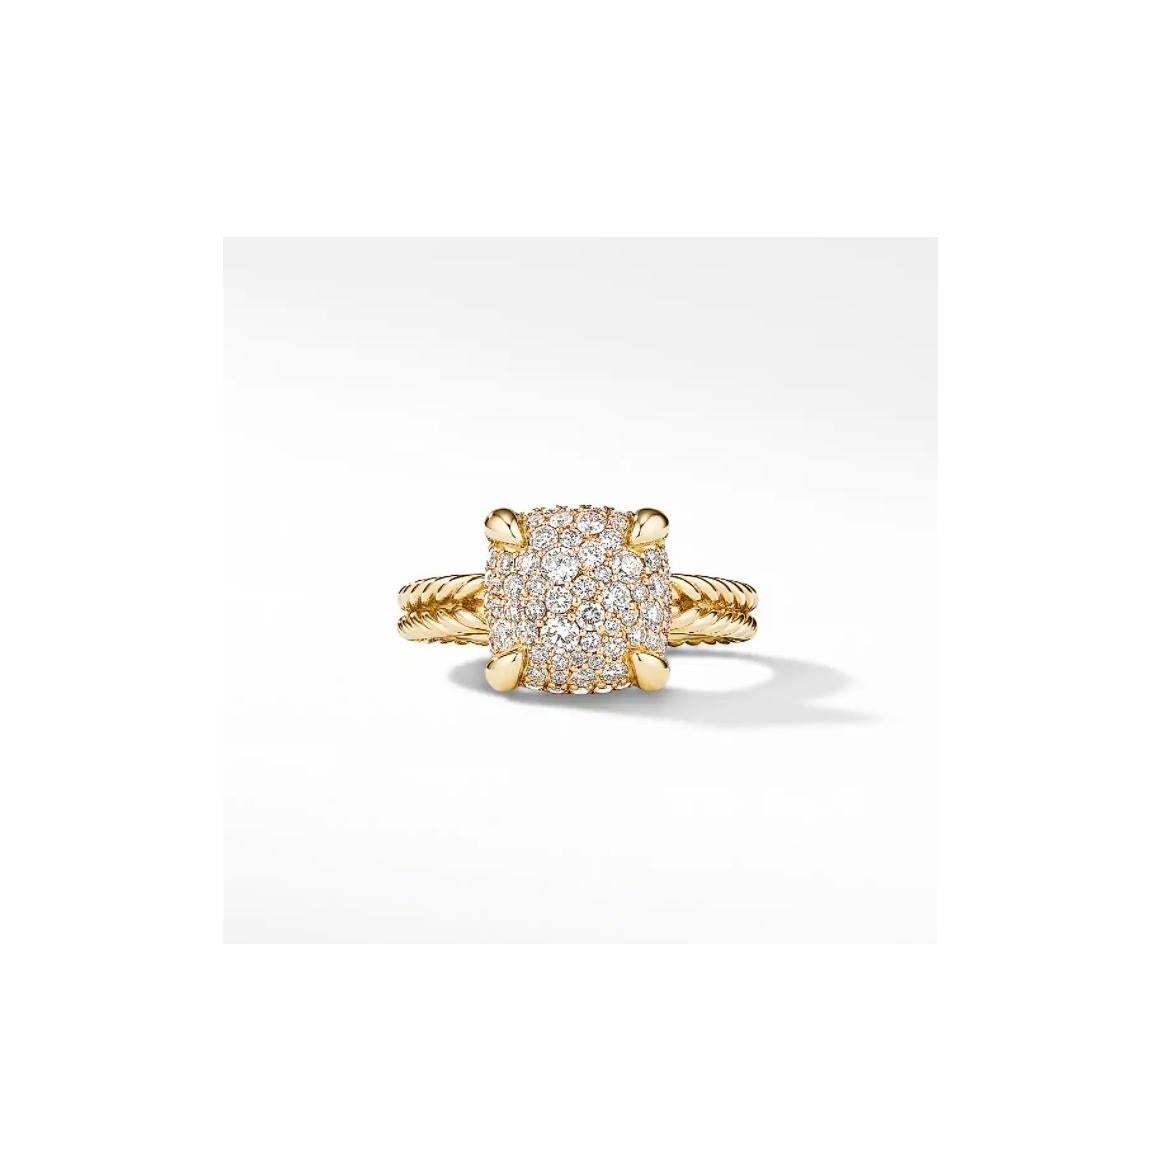 DAVID YURMAN CHATELAINE RING IN 18K YELLOW GOLD WITH FULL PAVE DIAMONDS.

Mint condition
18k Yellow gold
Ring width: 11mm
Ring size: 7.25

Comes with David Yurman pouch.

Retail: $3600